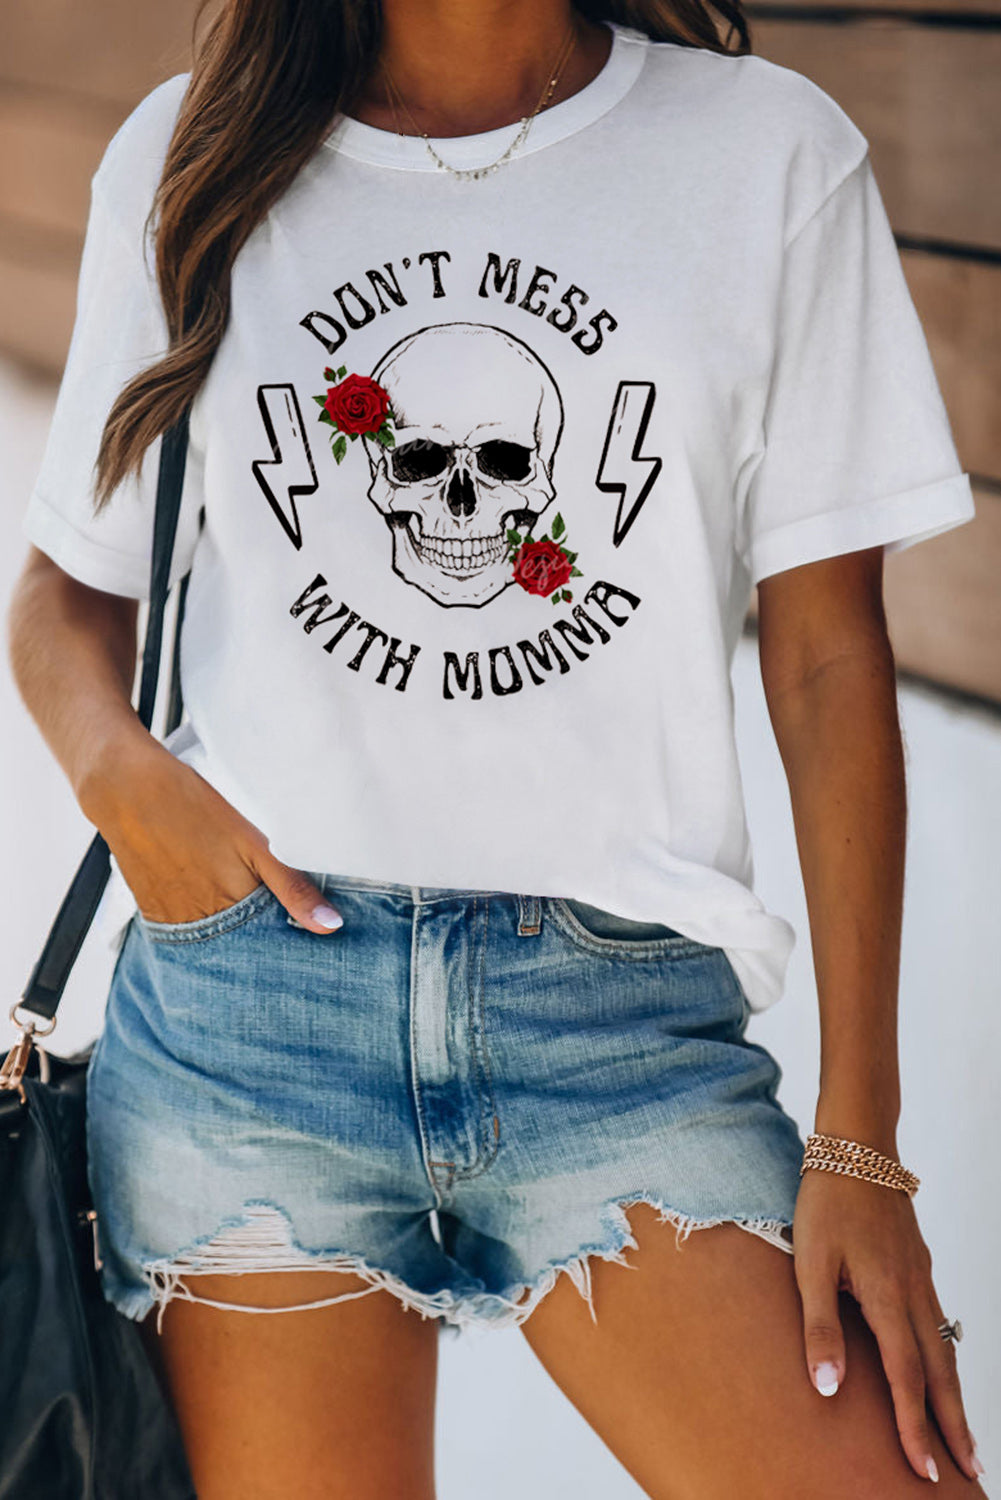 White DON'T MESS WITH MOMMA Graphic Tee White 95%Polyester+5%Spandex Graphic Tees JT's Designer Fashion